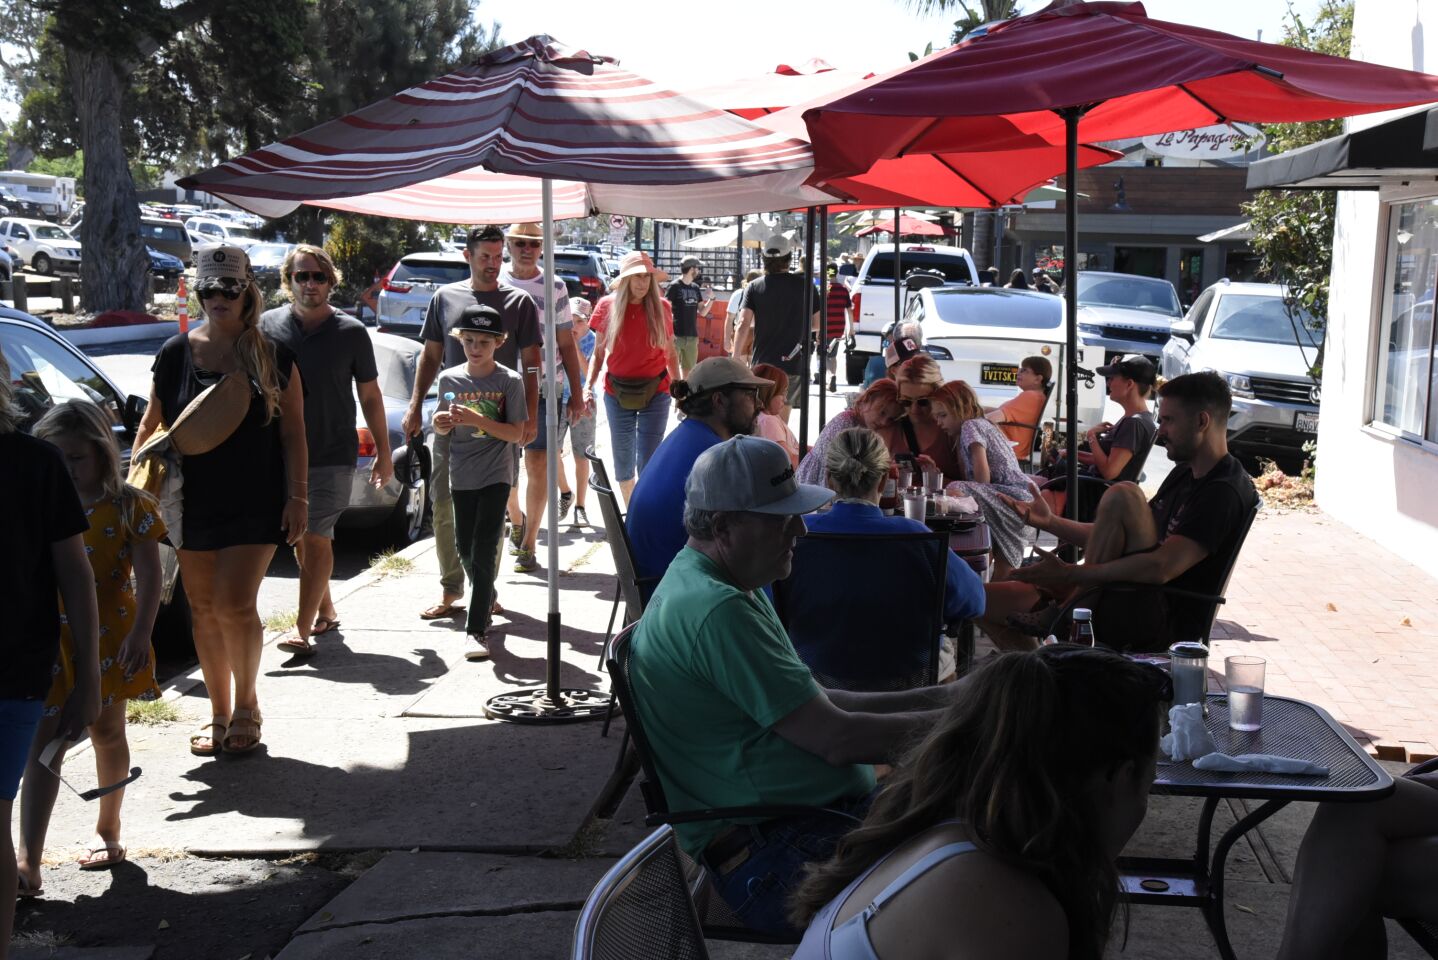 The streets were full for this Leucadia 101 event